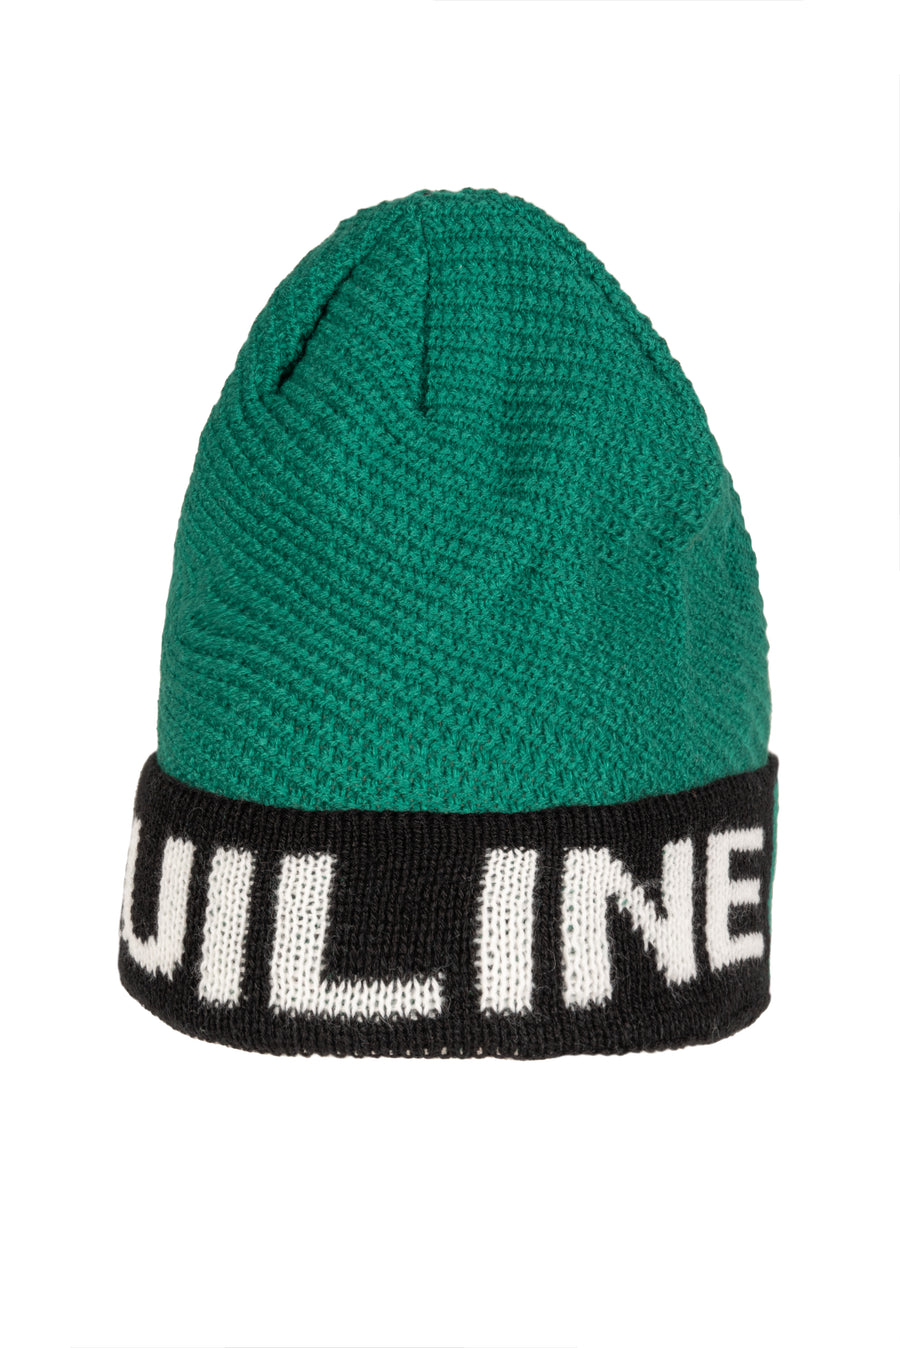 Equiline CliffeC Knit Beanie - ALL SALES FINAL